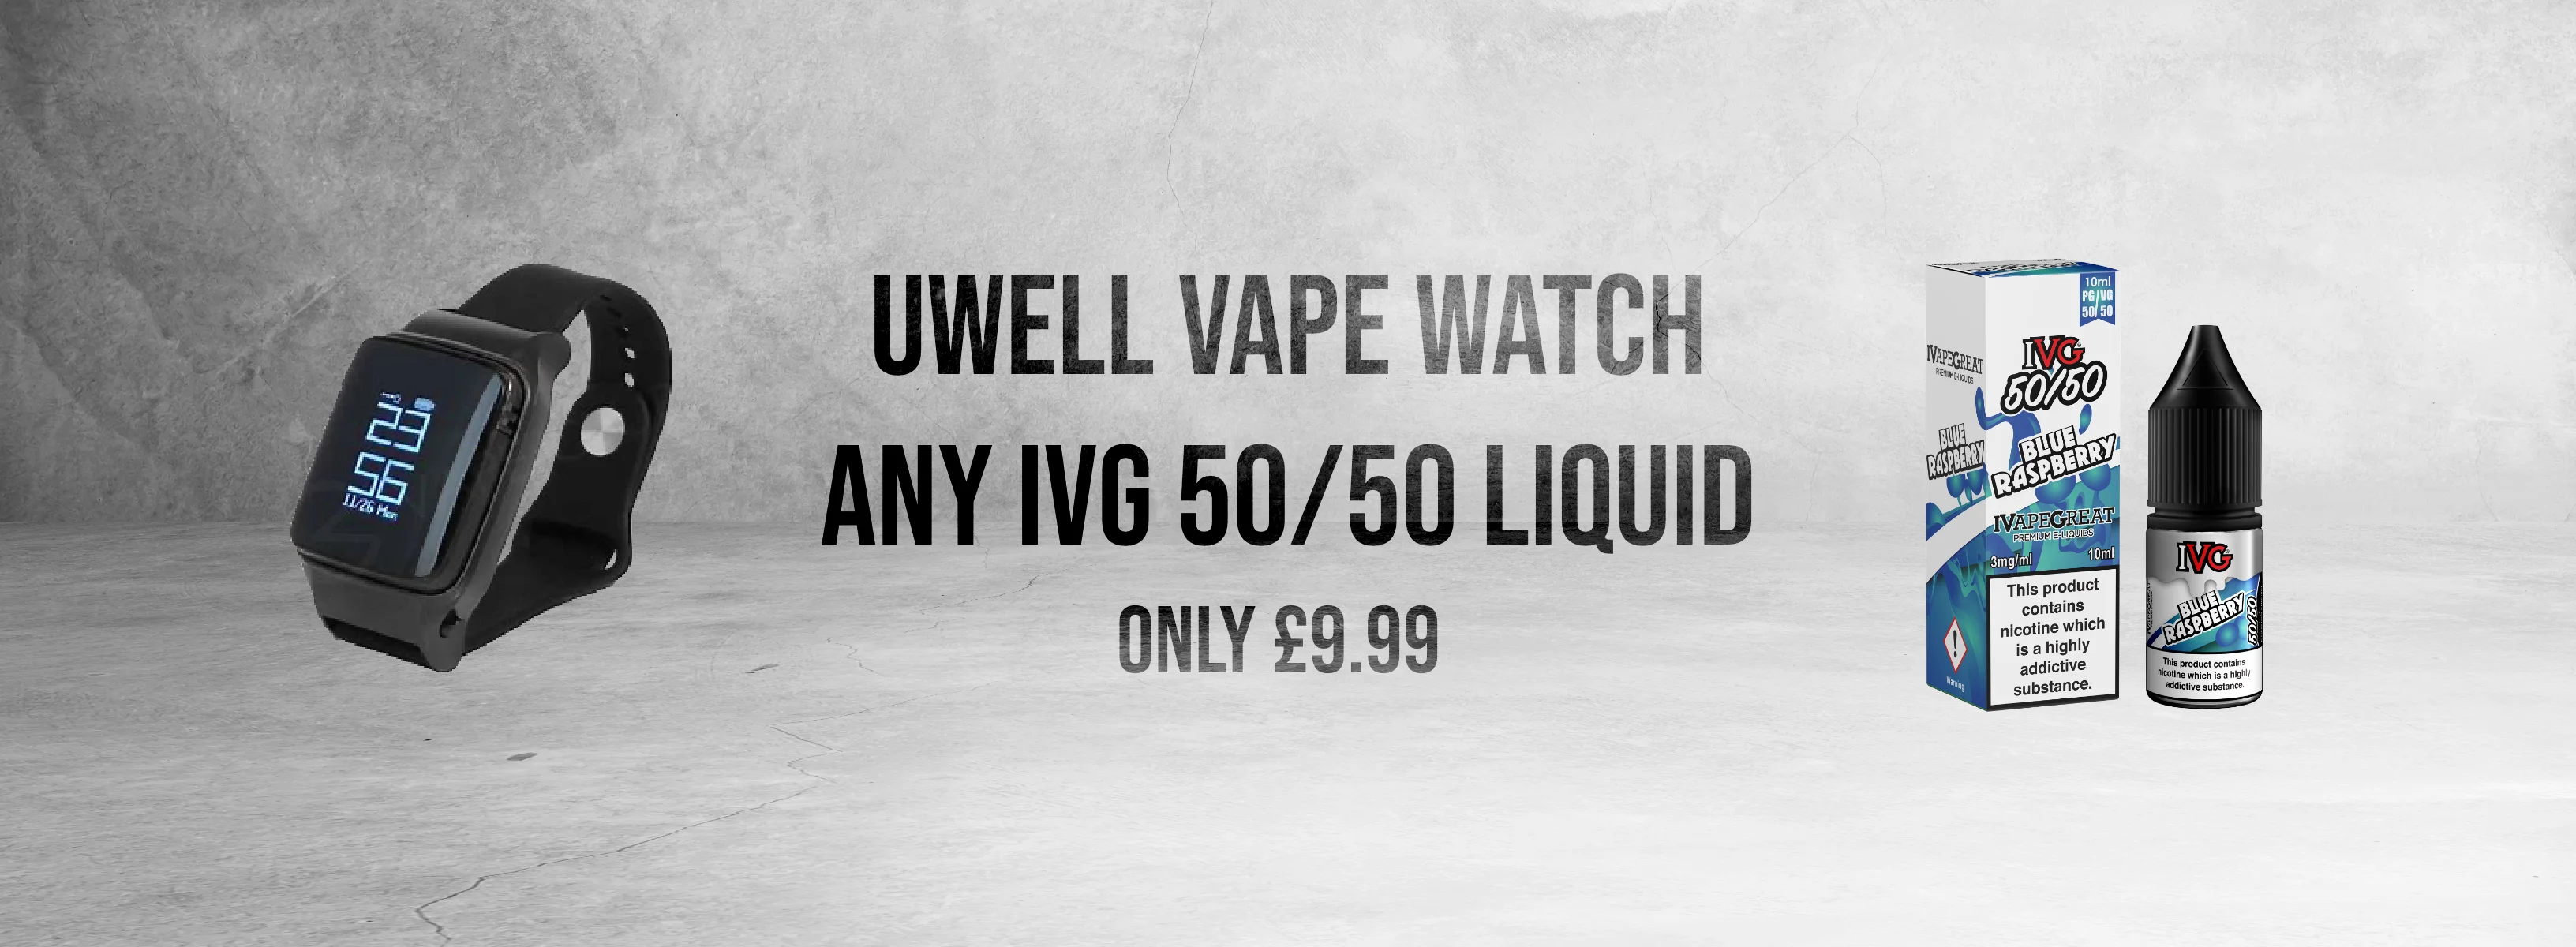 Advert for an offer on Uwell Vape Watch and IVG 50/50